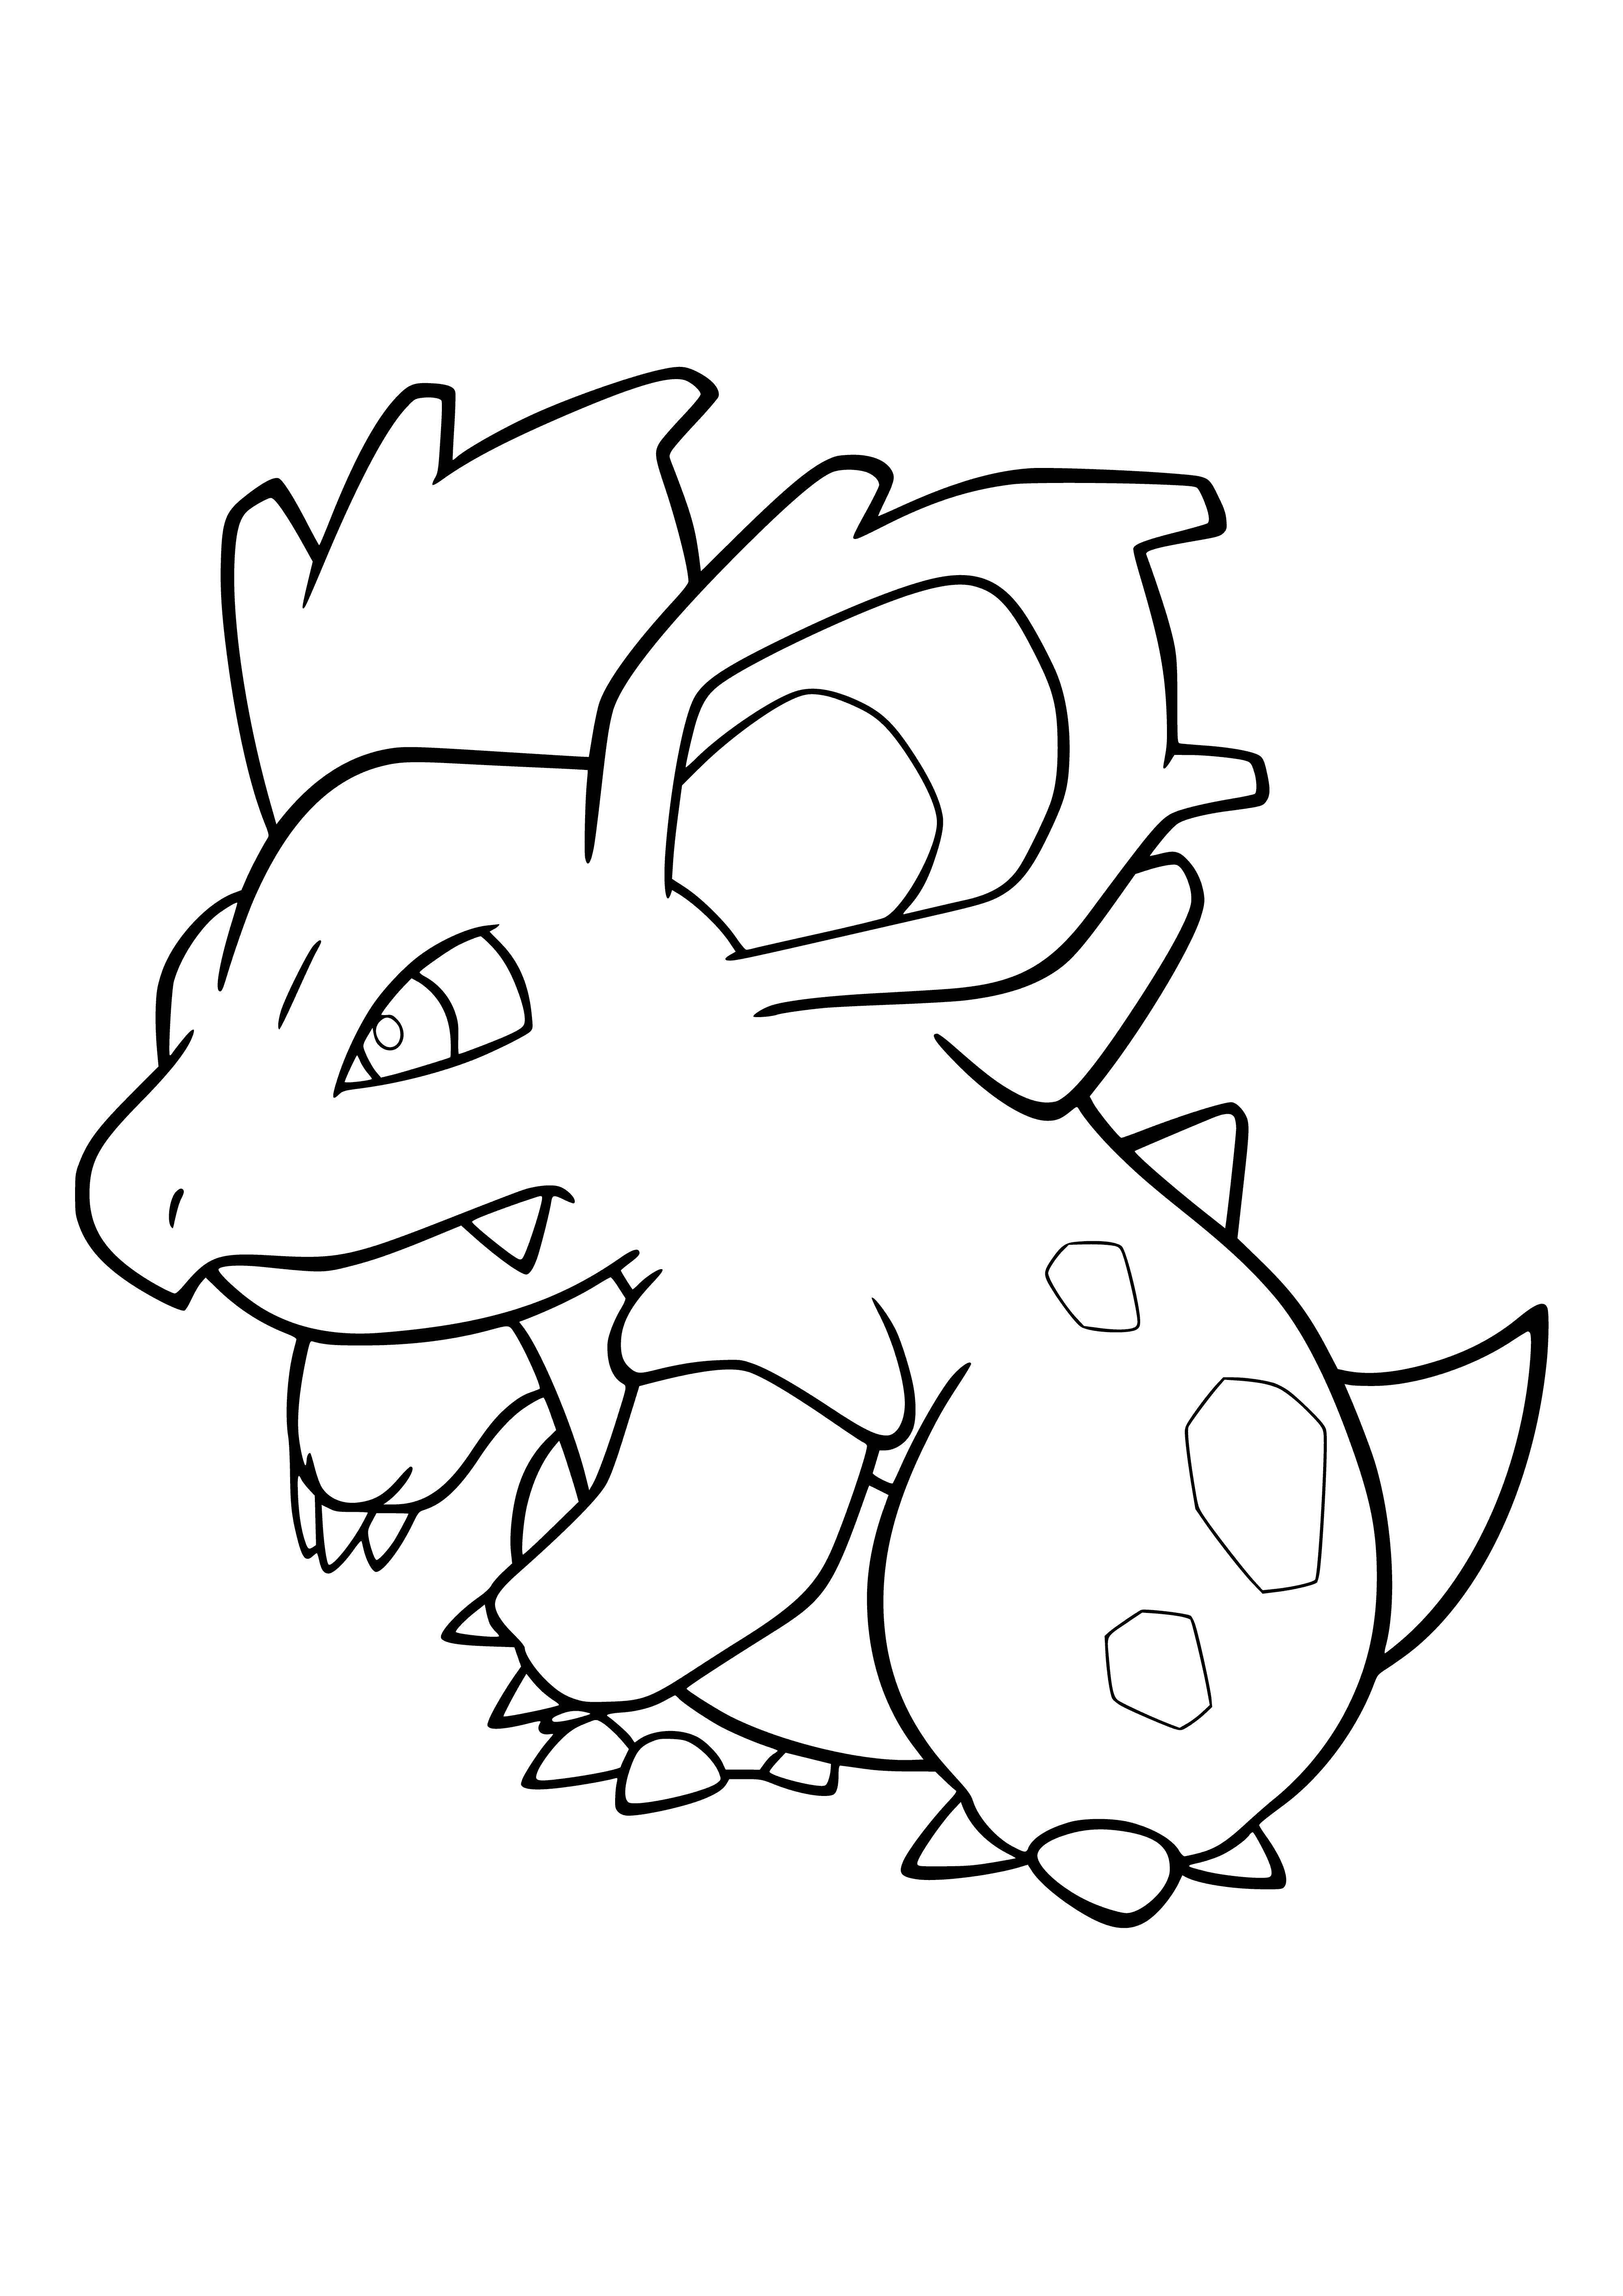 coloring page: A Nidorina is a small, mouse-like Pokemon with blue back, white belly, & two small horns. It evolves from Nidoran & has a black stripe down its back.